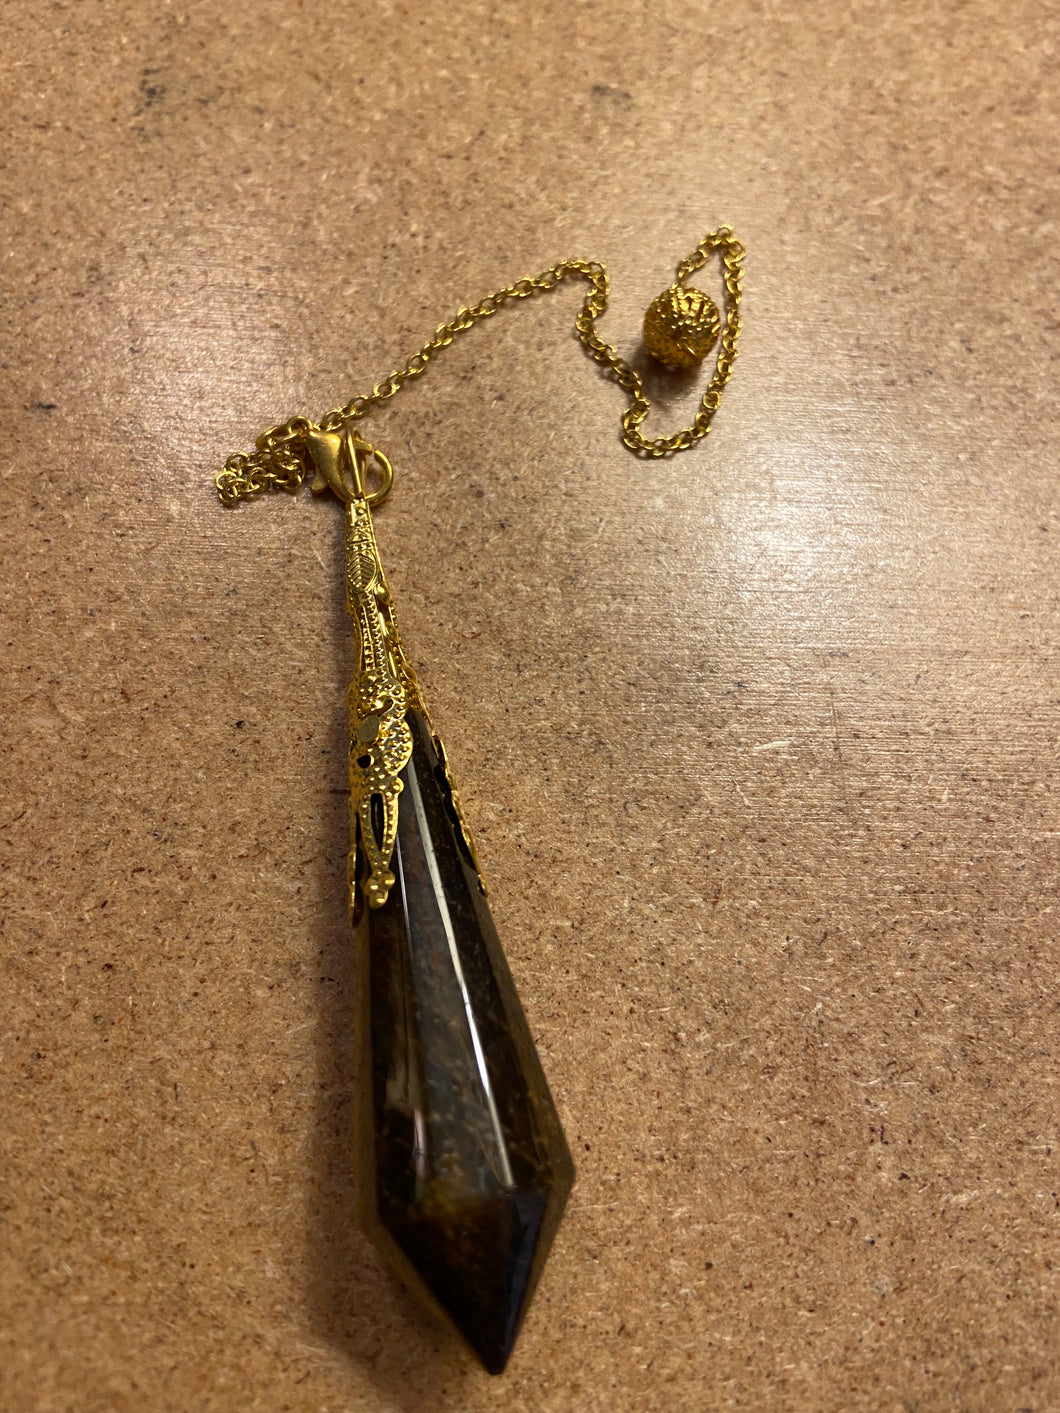 Sonoma Valley Pendulum made by Soul Creations